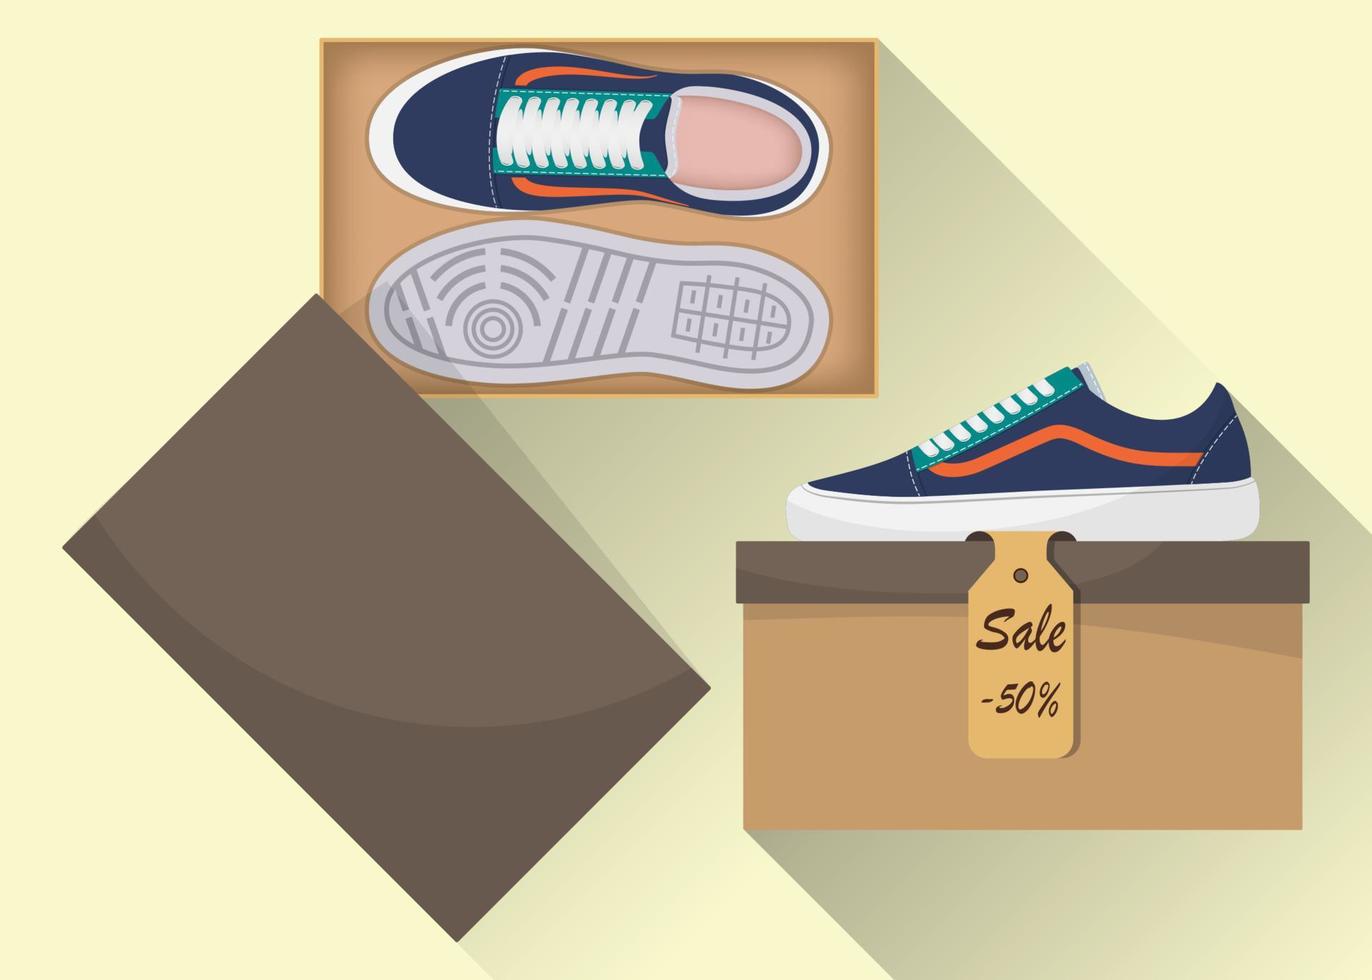 Stylish modern sneakers in box, side and top view. The price tag with a discount of 50 percent. Sports or casual shoes. Illustration for a shoe store. Vector flat illustration.